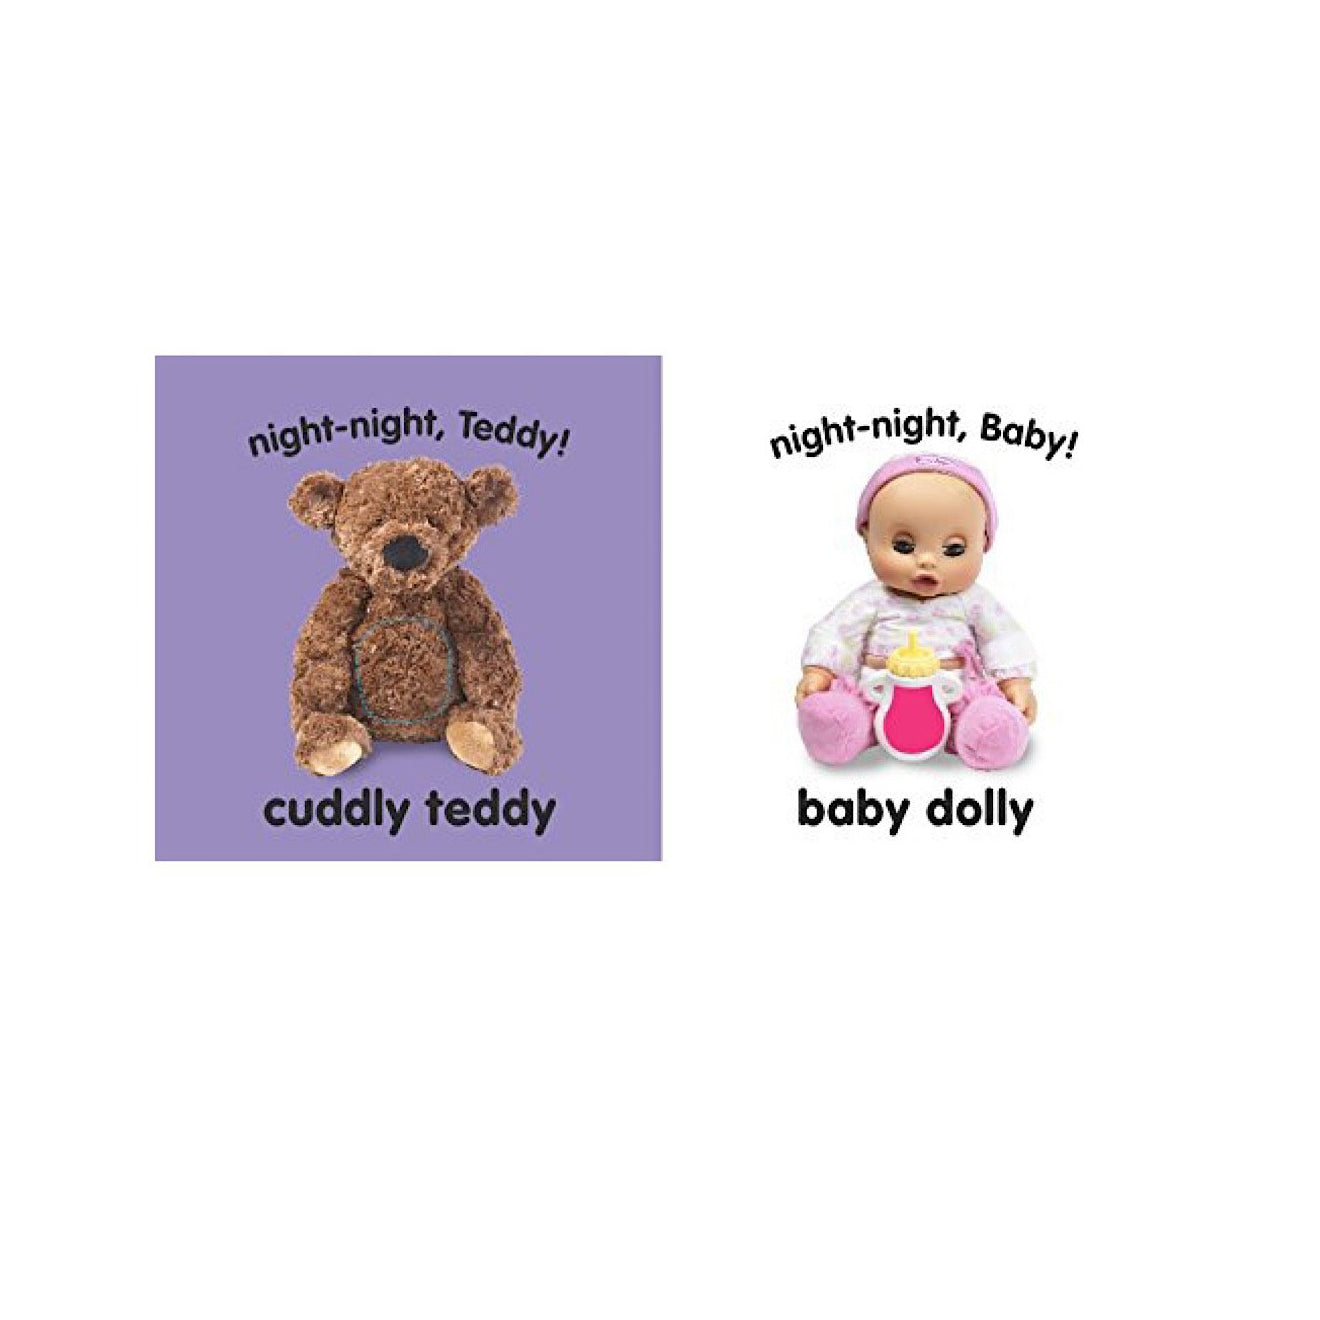 Bedtime Baby Touch and Feel Board Book